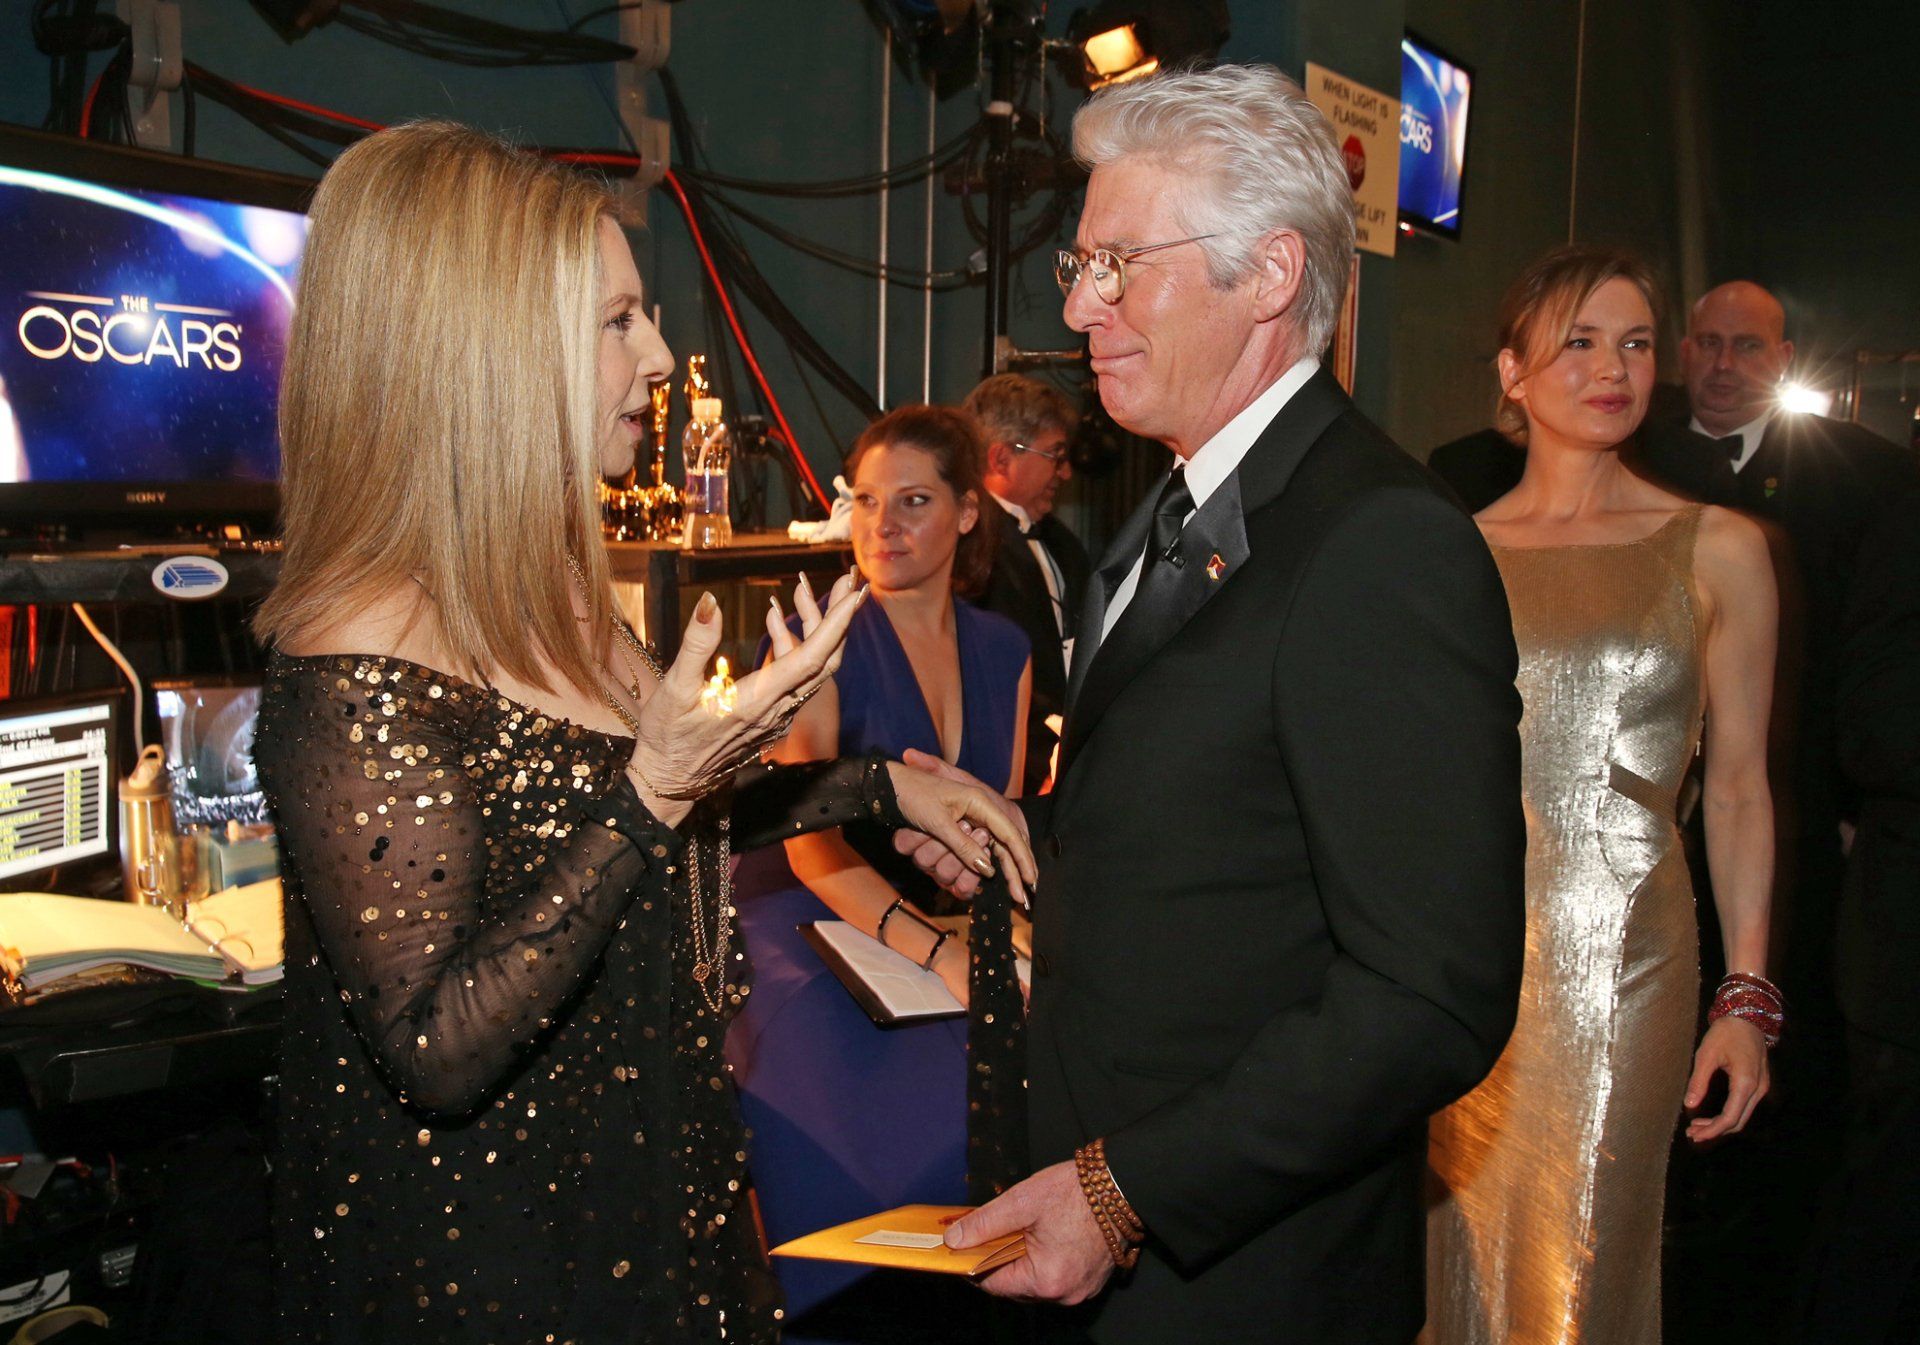 Streisand chats with Richard Gere backstage at the Oscar television show.